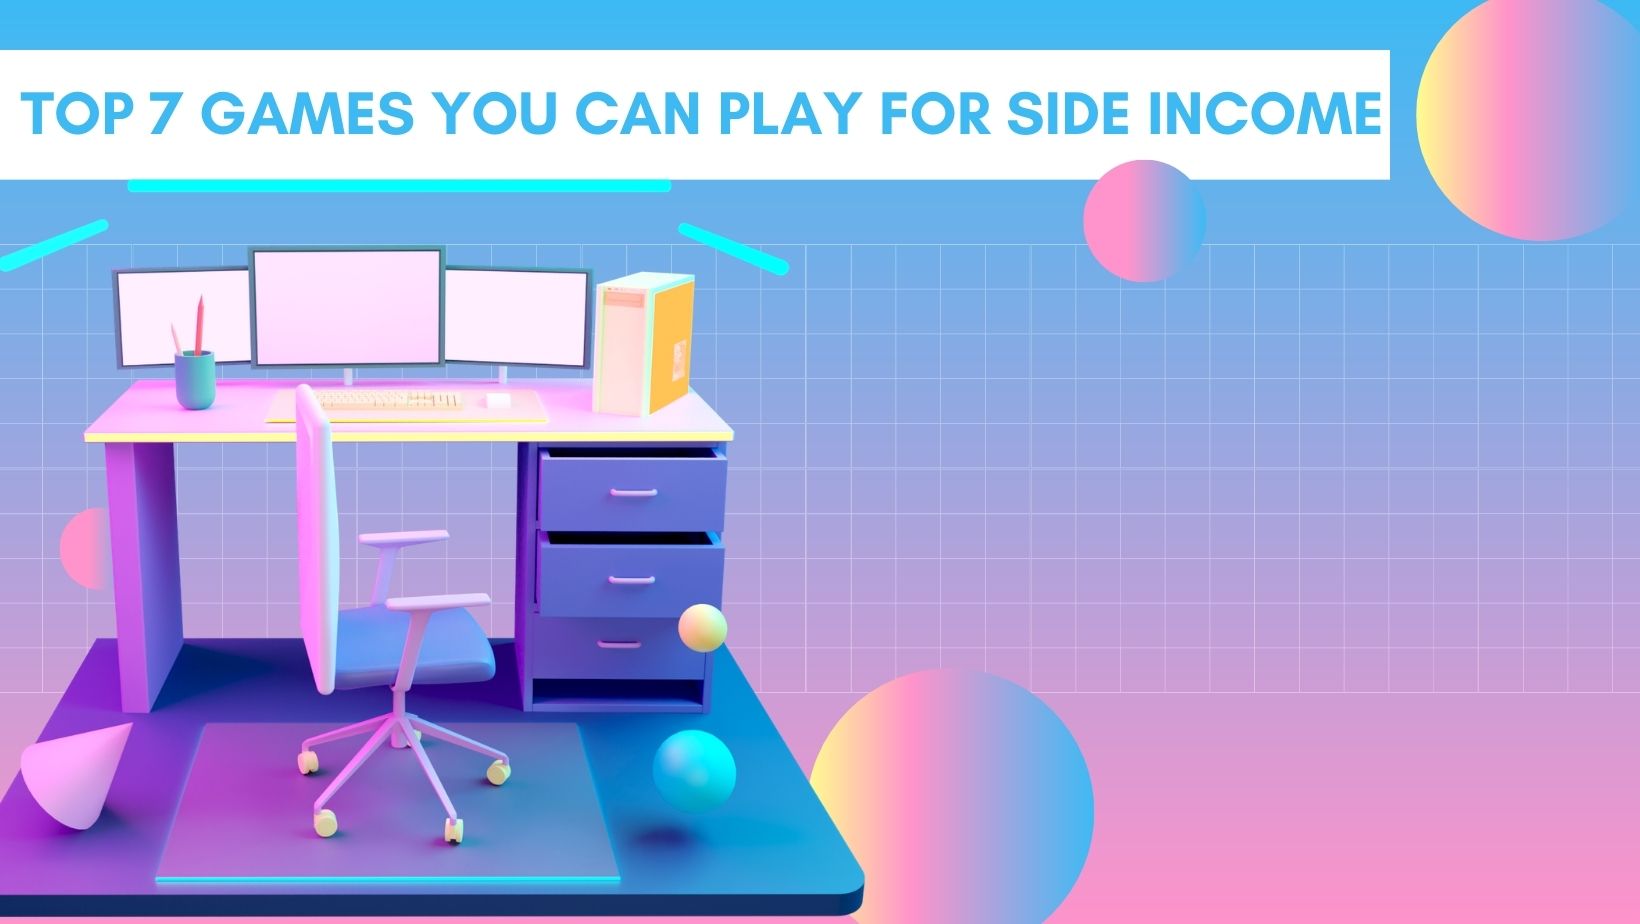 Top 7 games you can play for side income